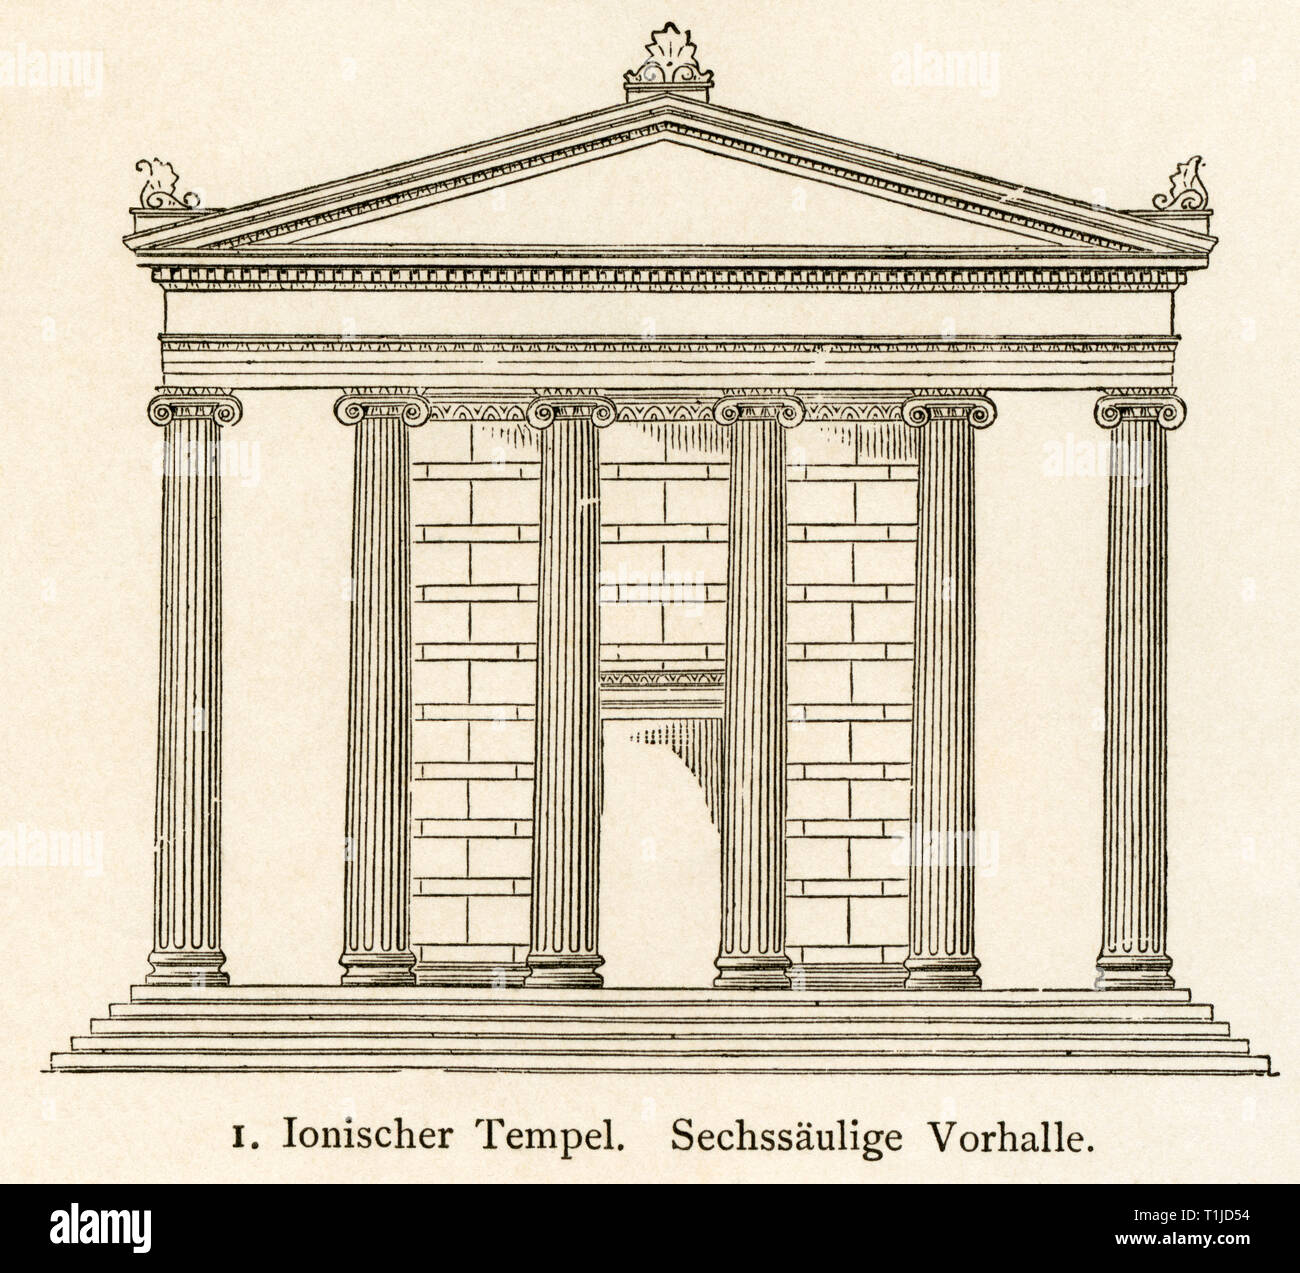 ancient world, Greece, temple in Ionic architectural style with six columns, illustration from: 'Kunsthistorische Bilderbogen ' (art history image gallery), first part, published by E. A. Seemann, Leipzig, 1878., Additional-Rights-Clearance-Info-Not-Available Stock Photo